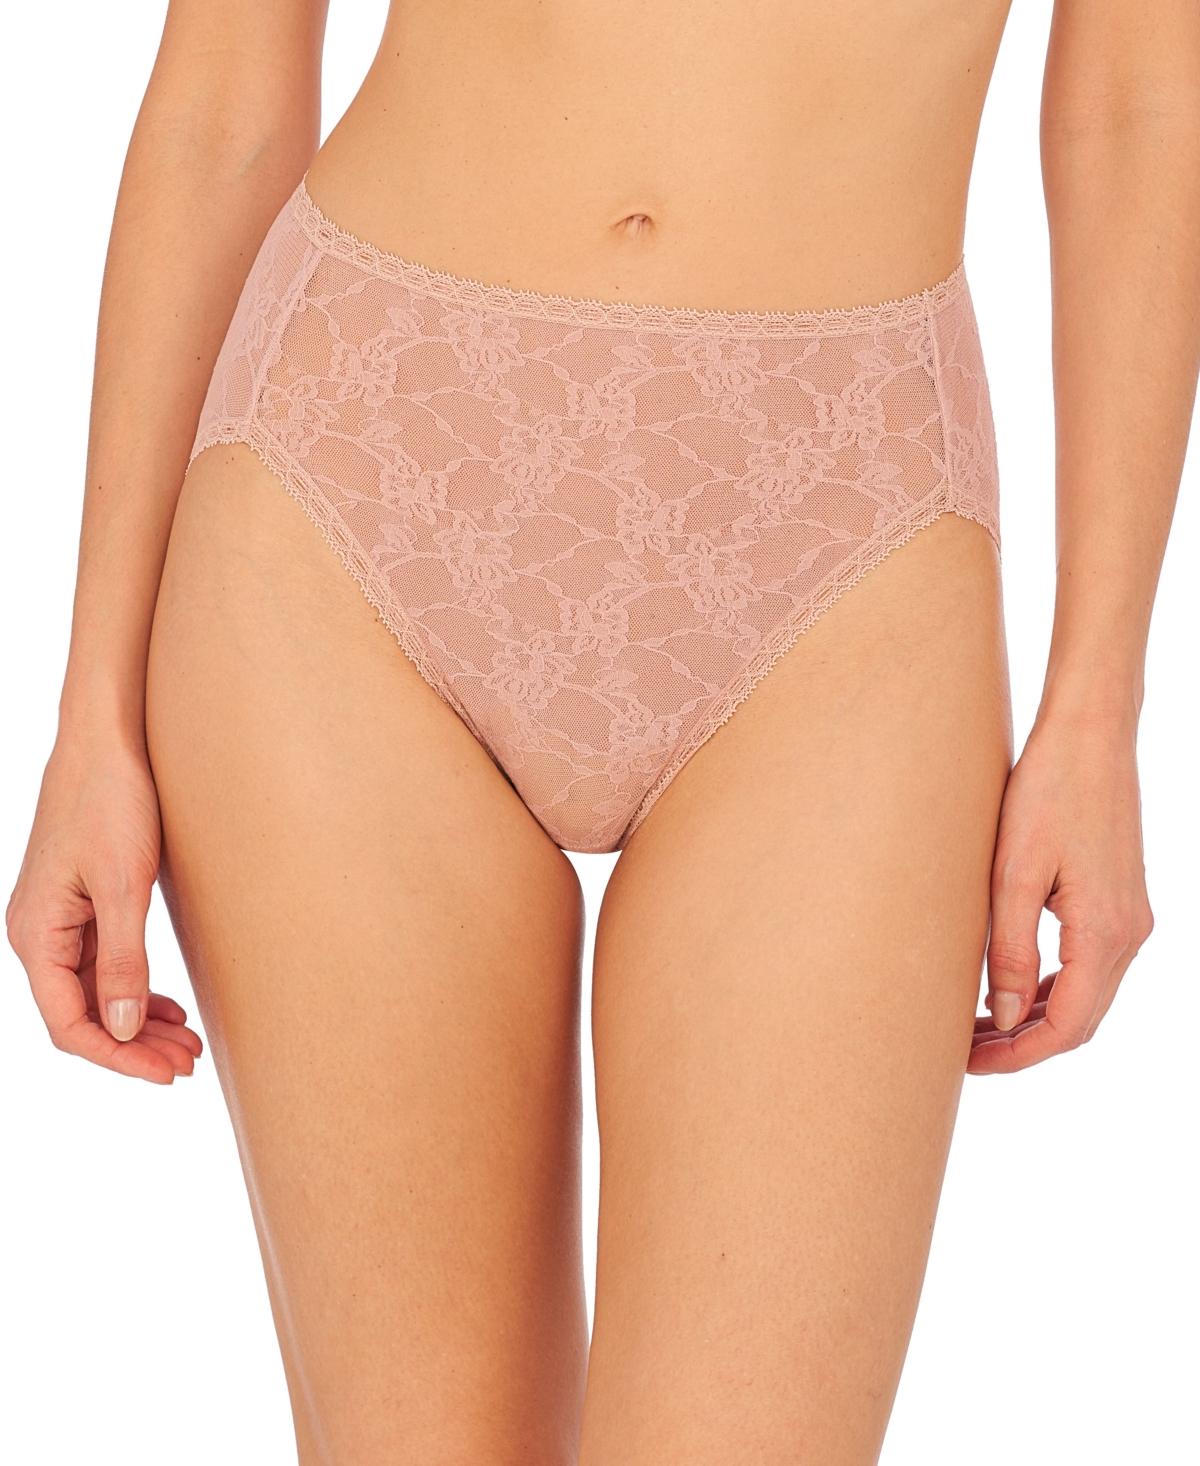 Natori Bliss Allure One Size Lace French Cut Underwear 772303 in